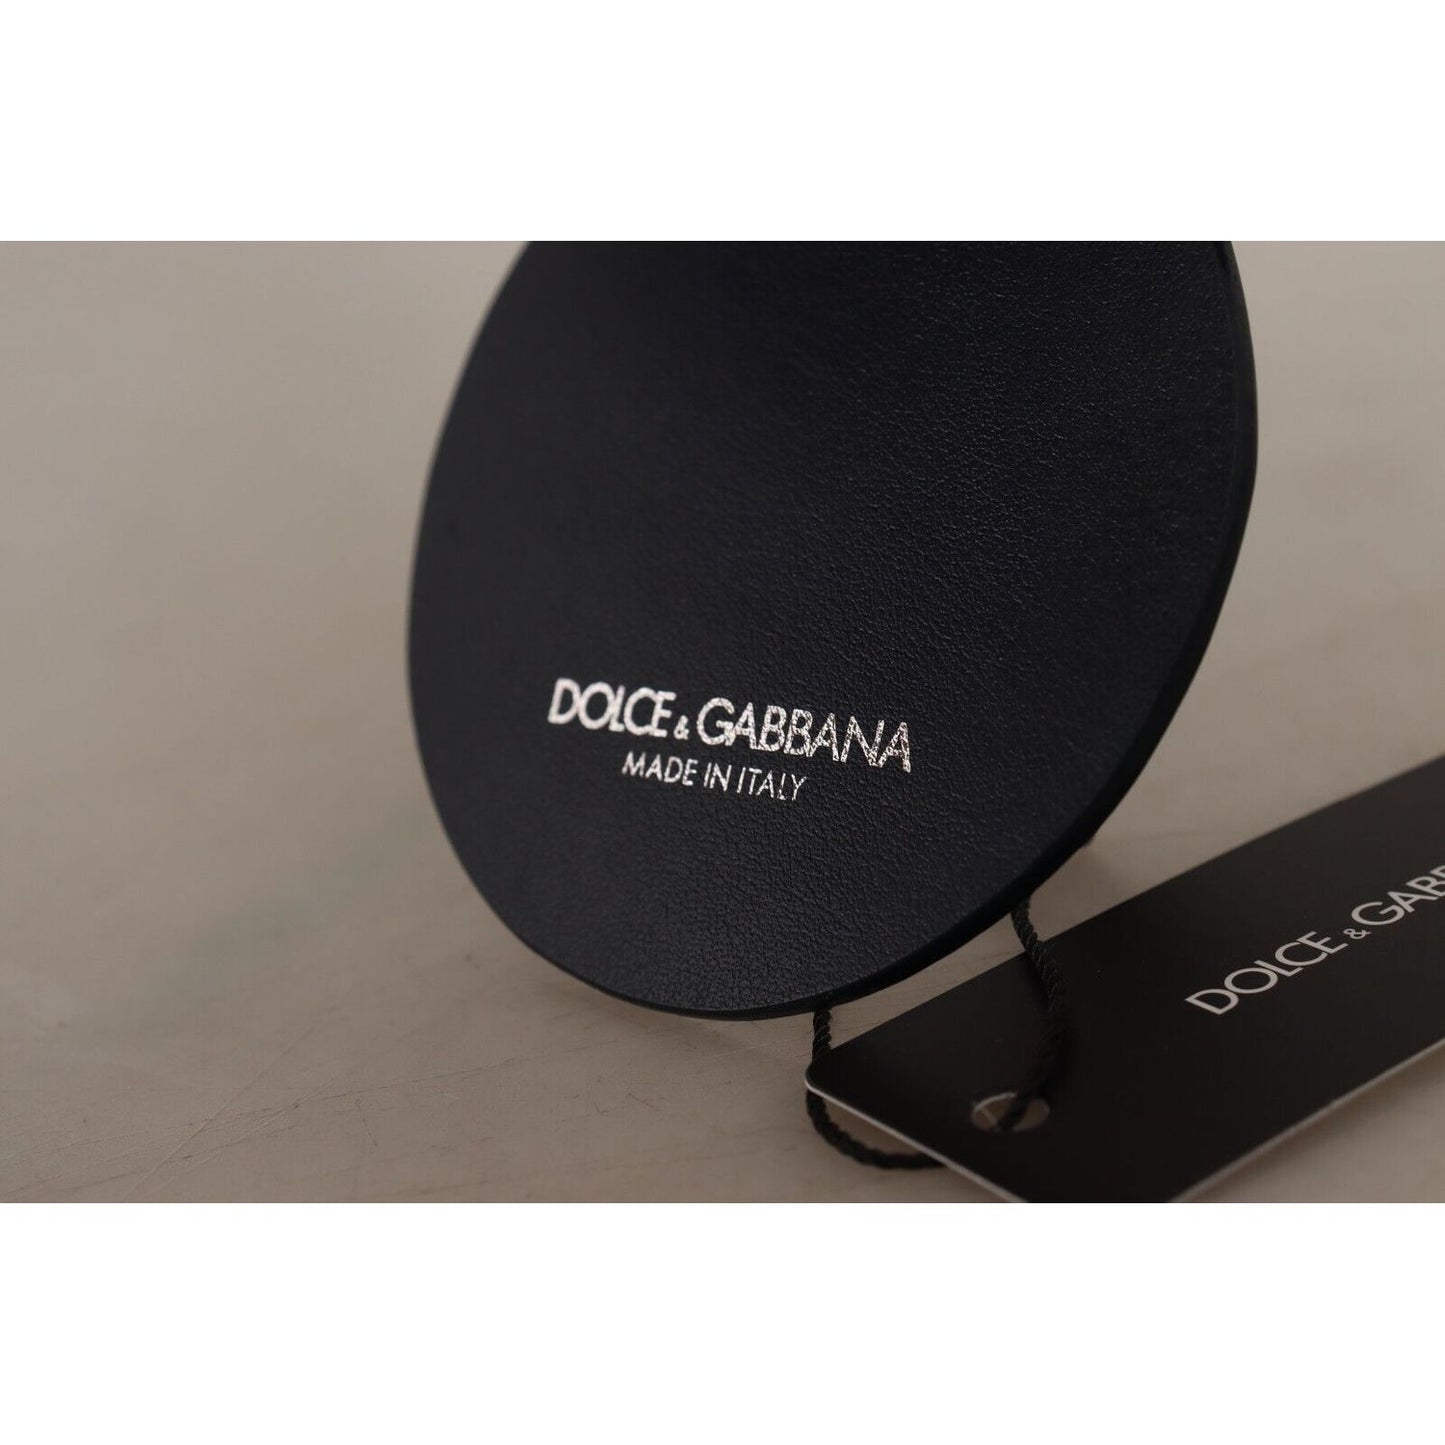 Dolce & Gabbana Chic Black Leather Keychain with Silver Accents black-leather-shell-metal-silver-tone-keyring-keychain